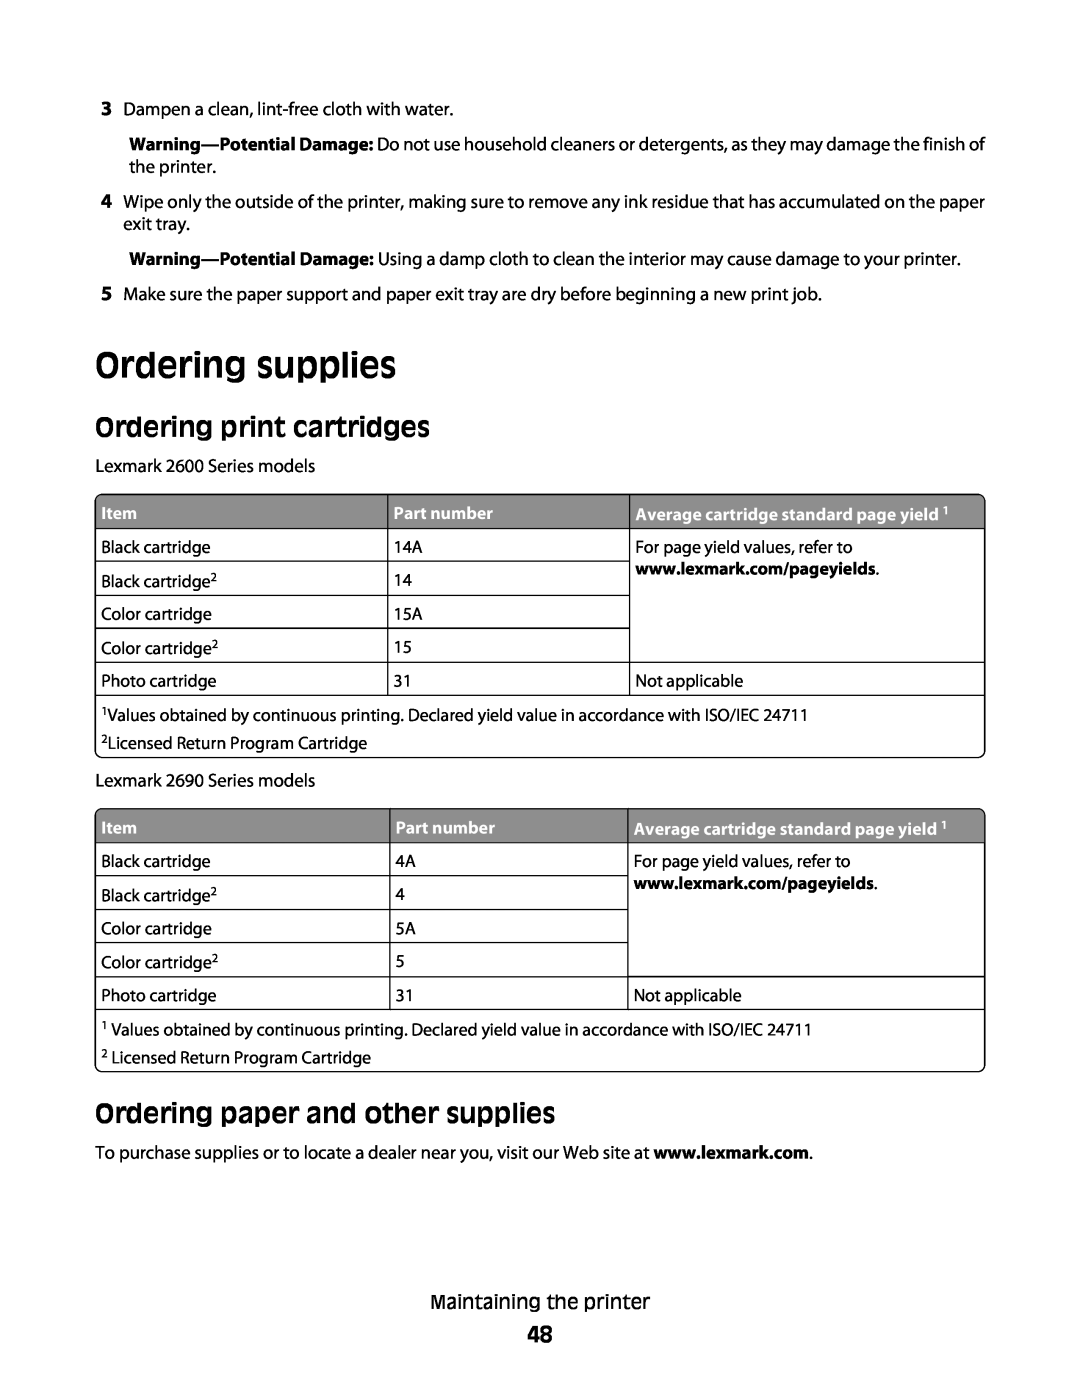 Lexmark 4433, 4445 manual Ordering supplies, Ordering print cartridges, Ordering paper and other supplies 